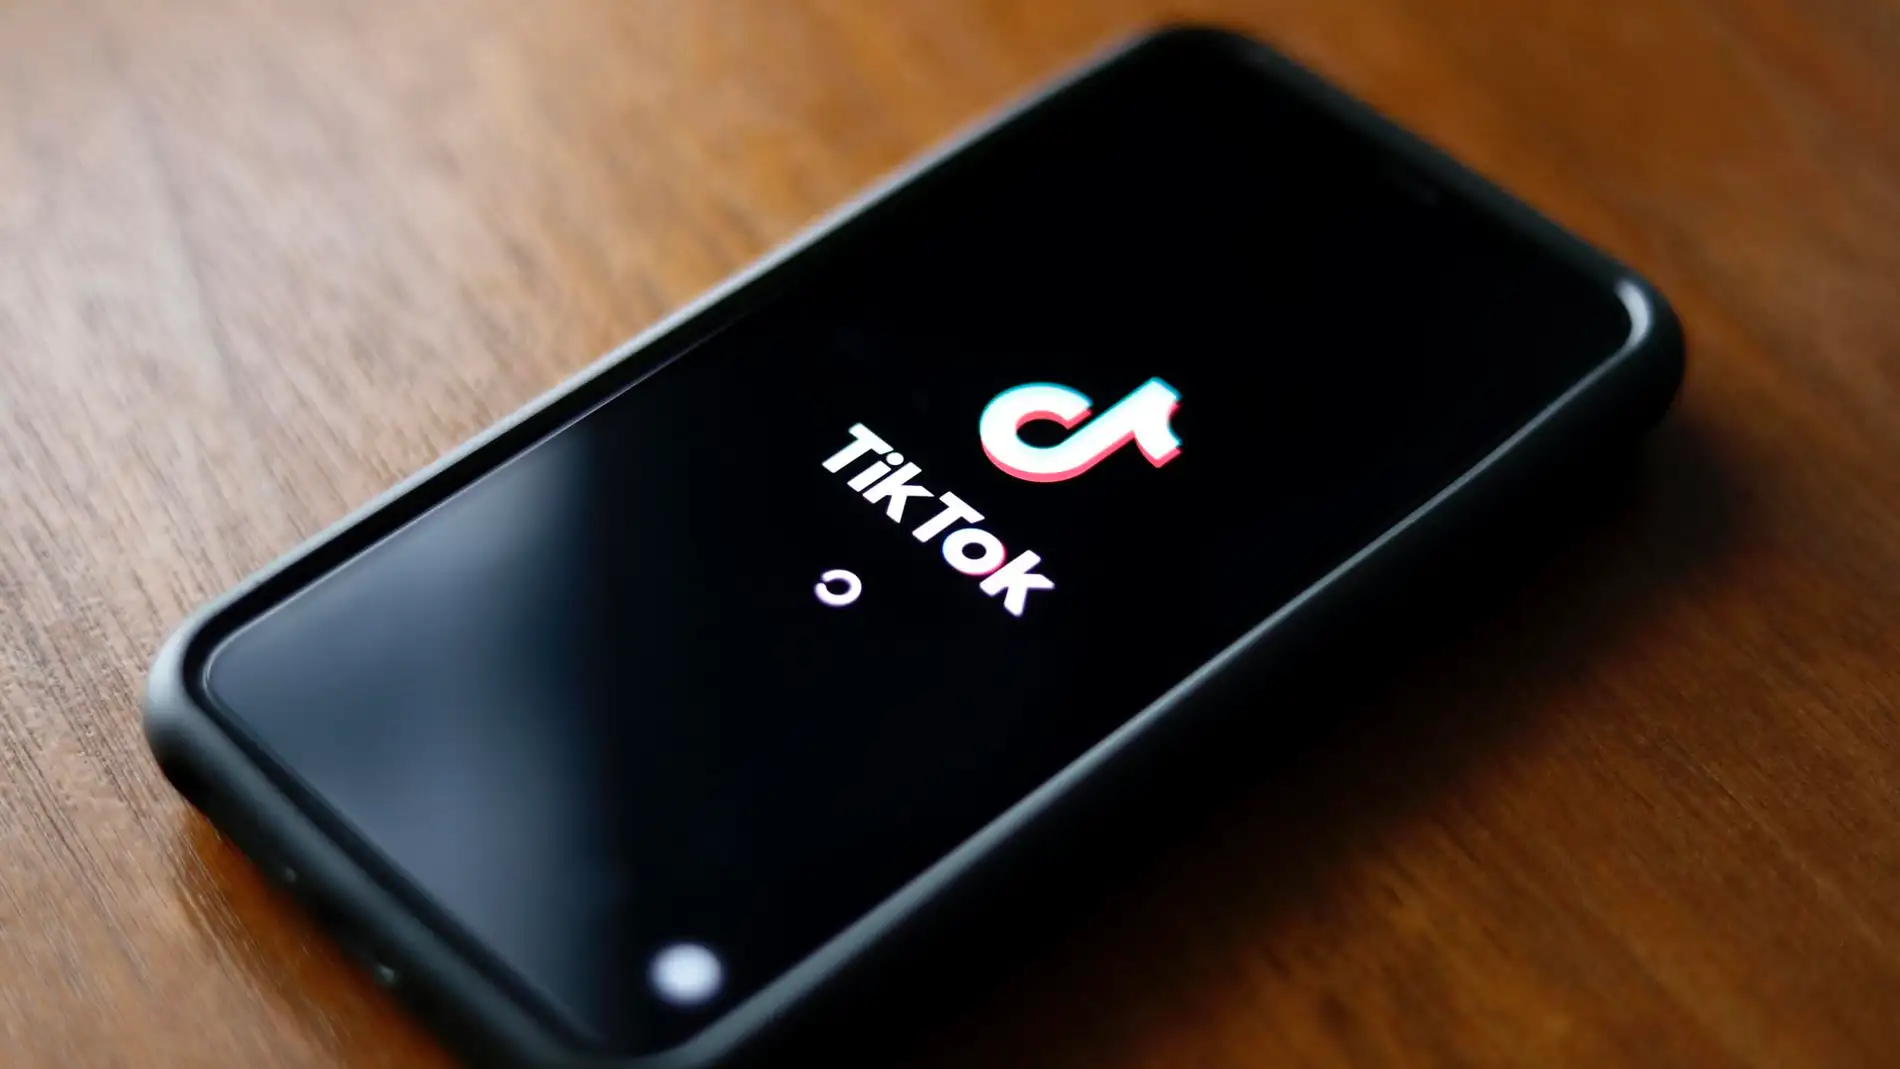 Switzerland: They’re not going to ban TikTok on government phones